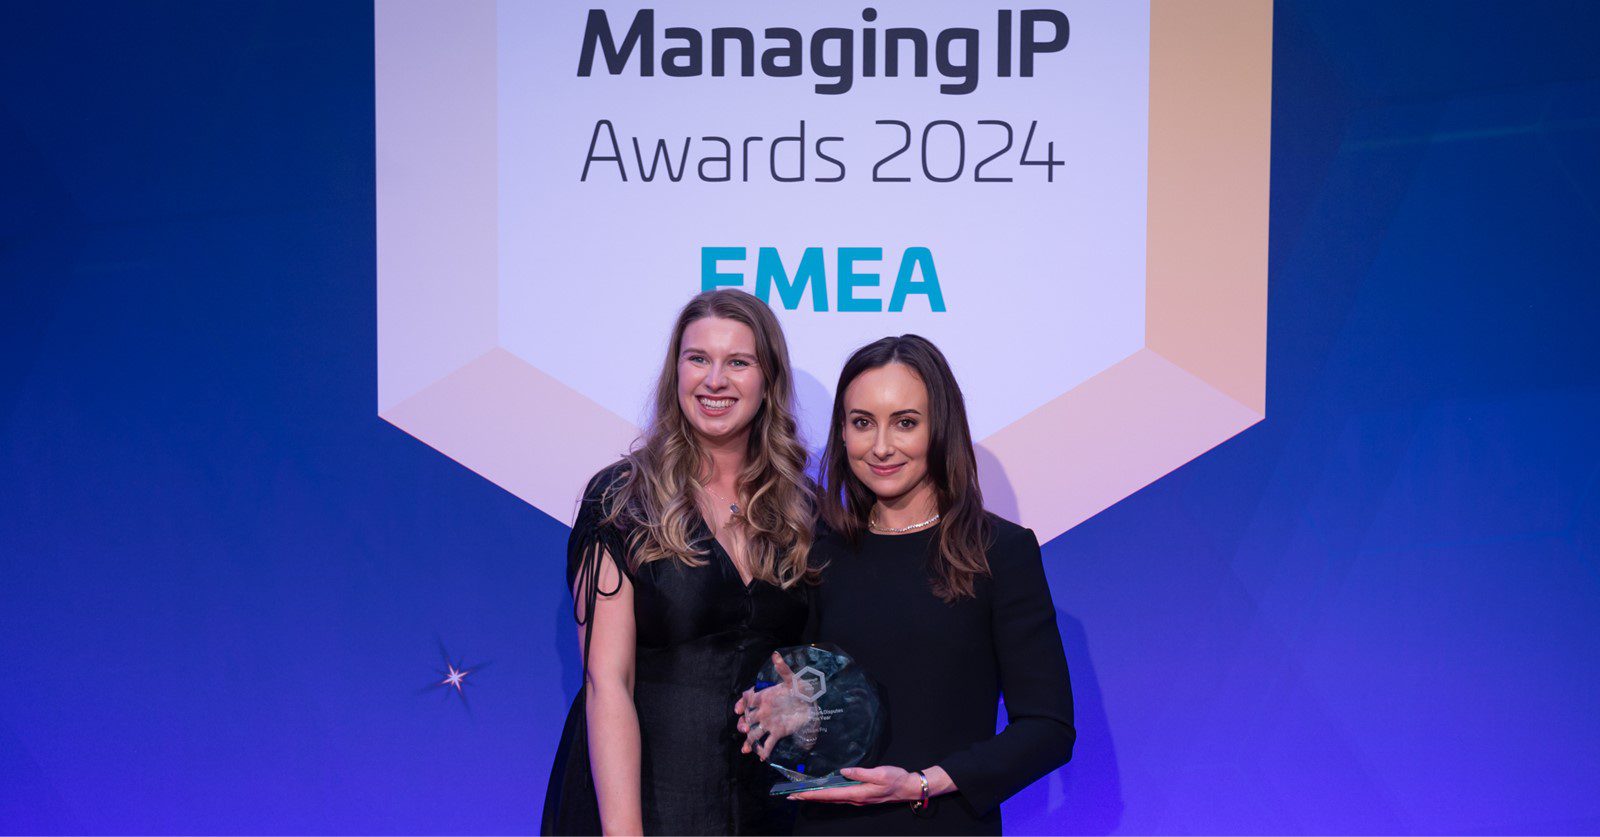 William Fry Secures a Pair of Accolades at Prestigious Managing IP Awards